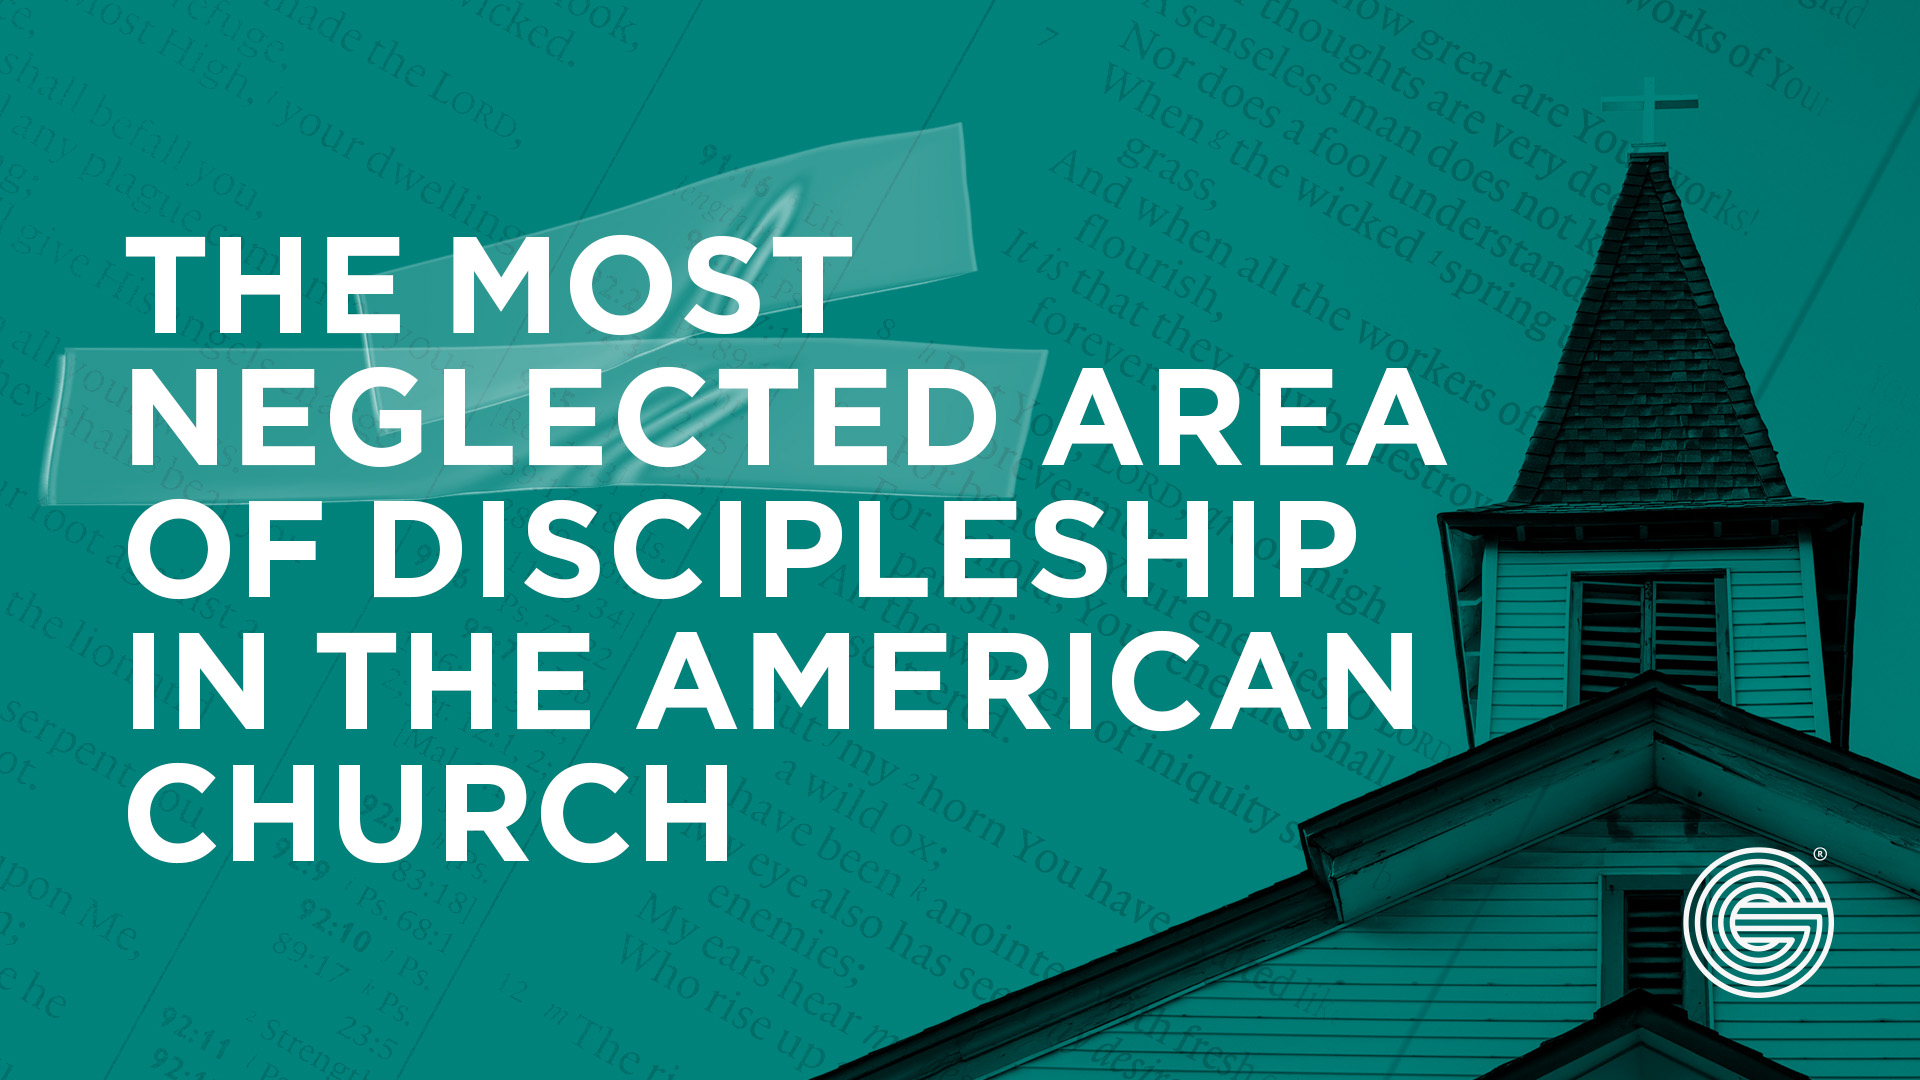 The Most Neglected Area of Discipleship in the American Church